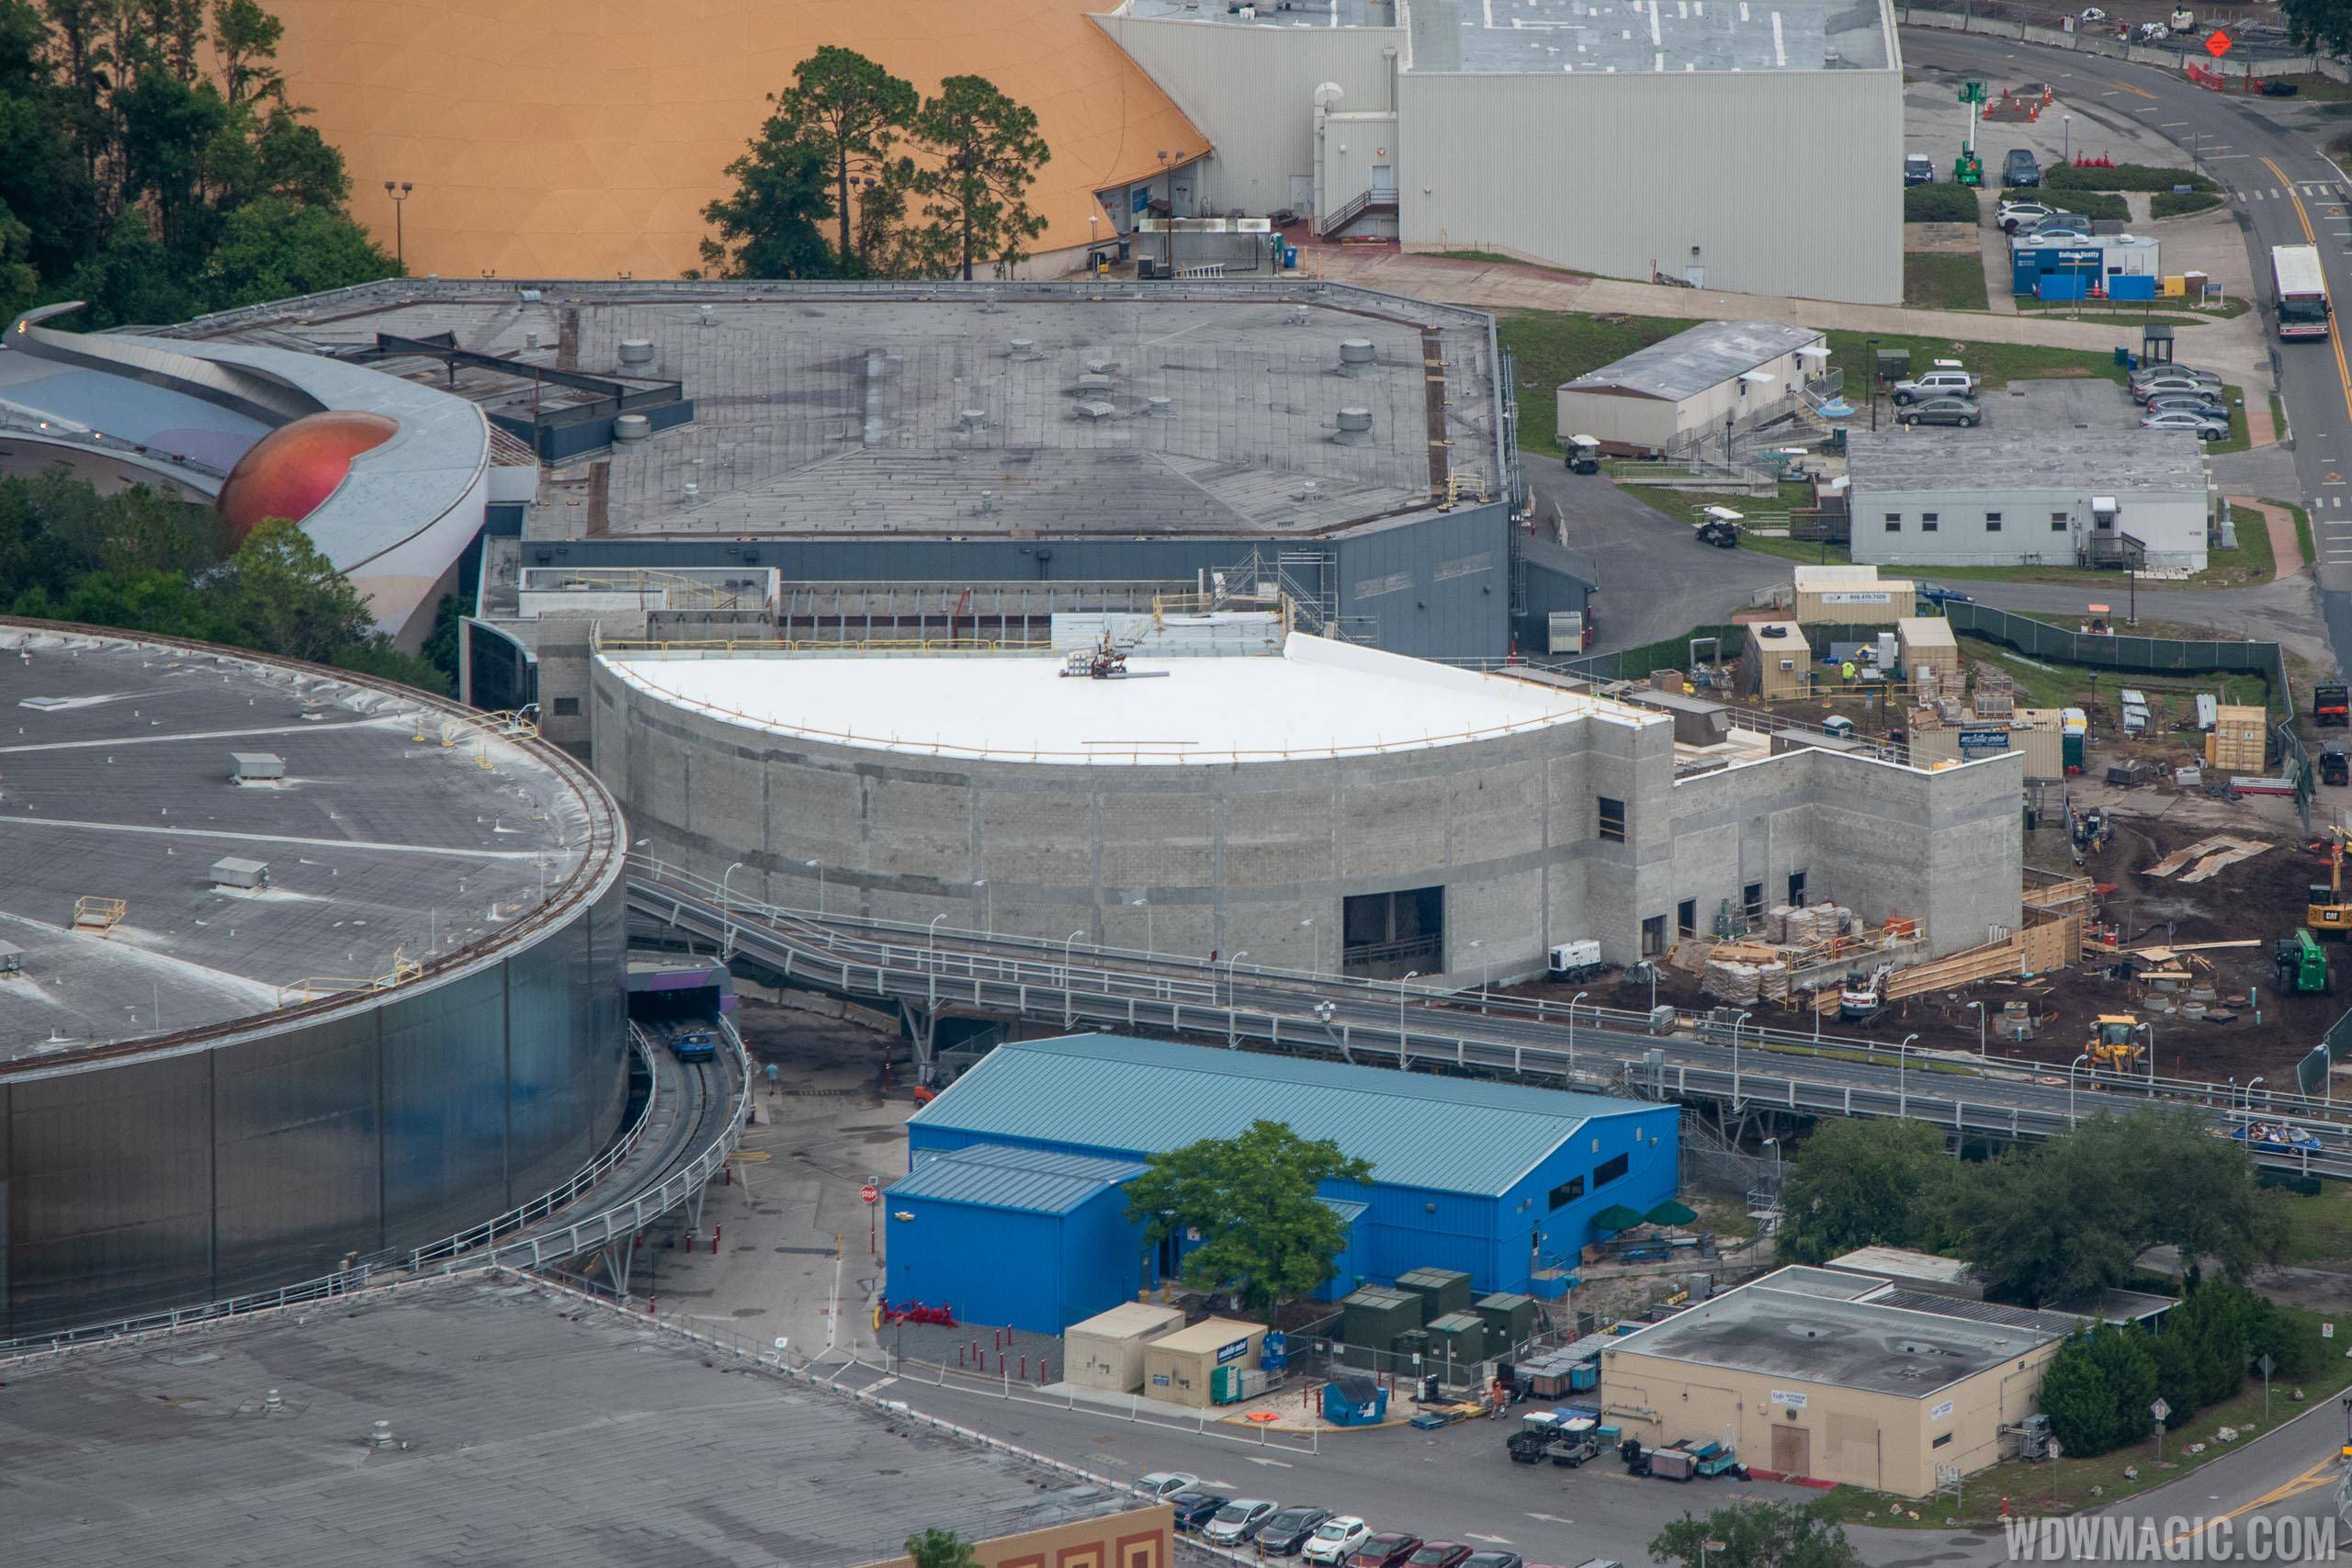 PHOTOS - Helicopter view of Epcot's upcoming Space themed restaurant